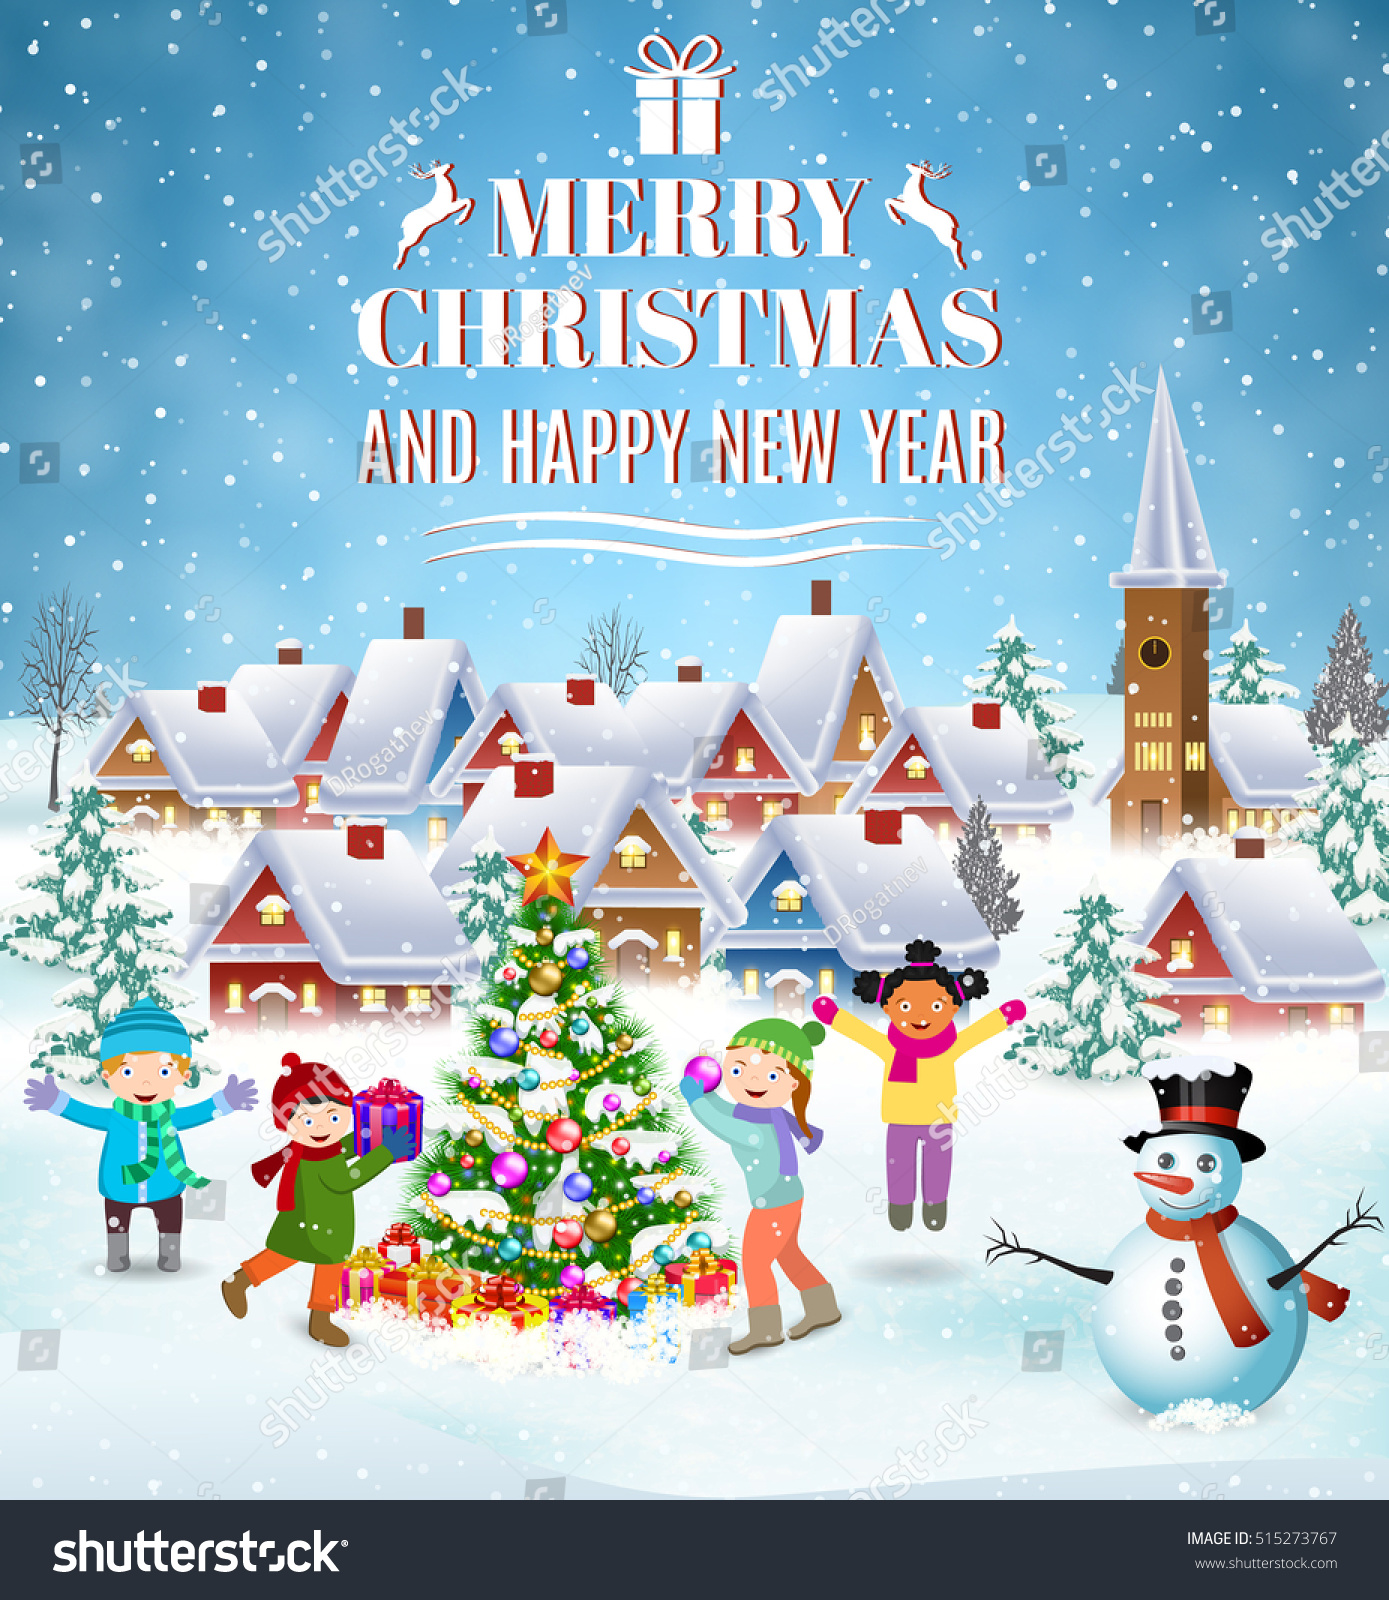 Happy New Year Merry Christmas Greeting Stock Vector 515273767 ...